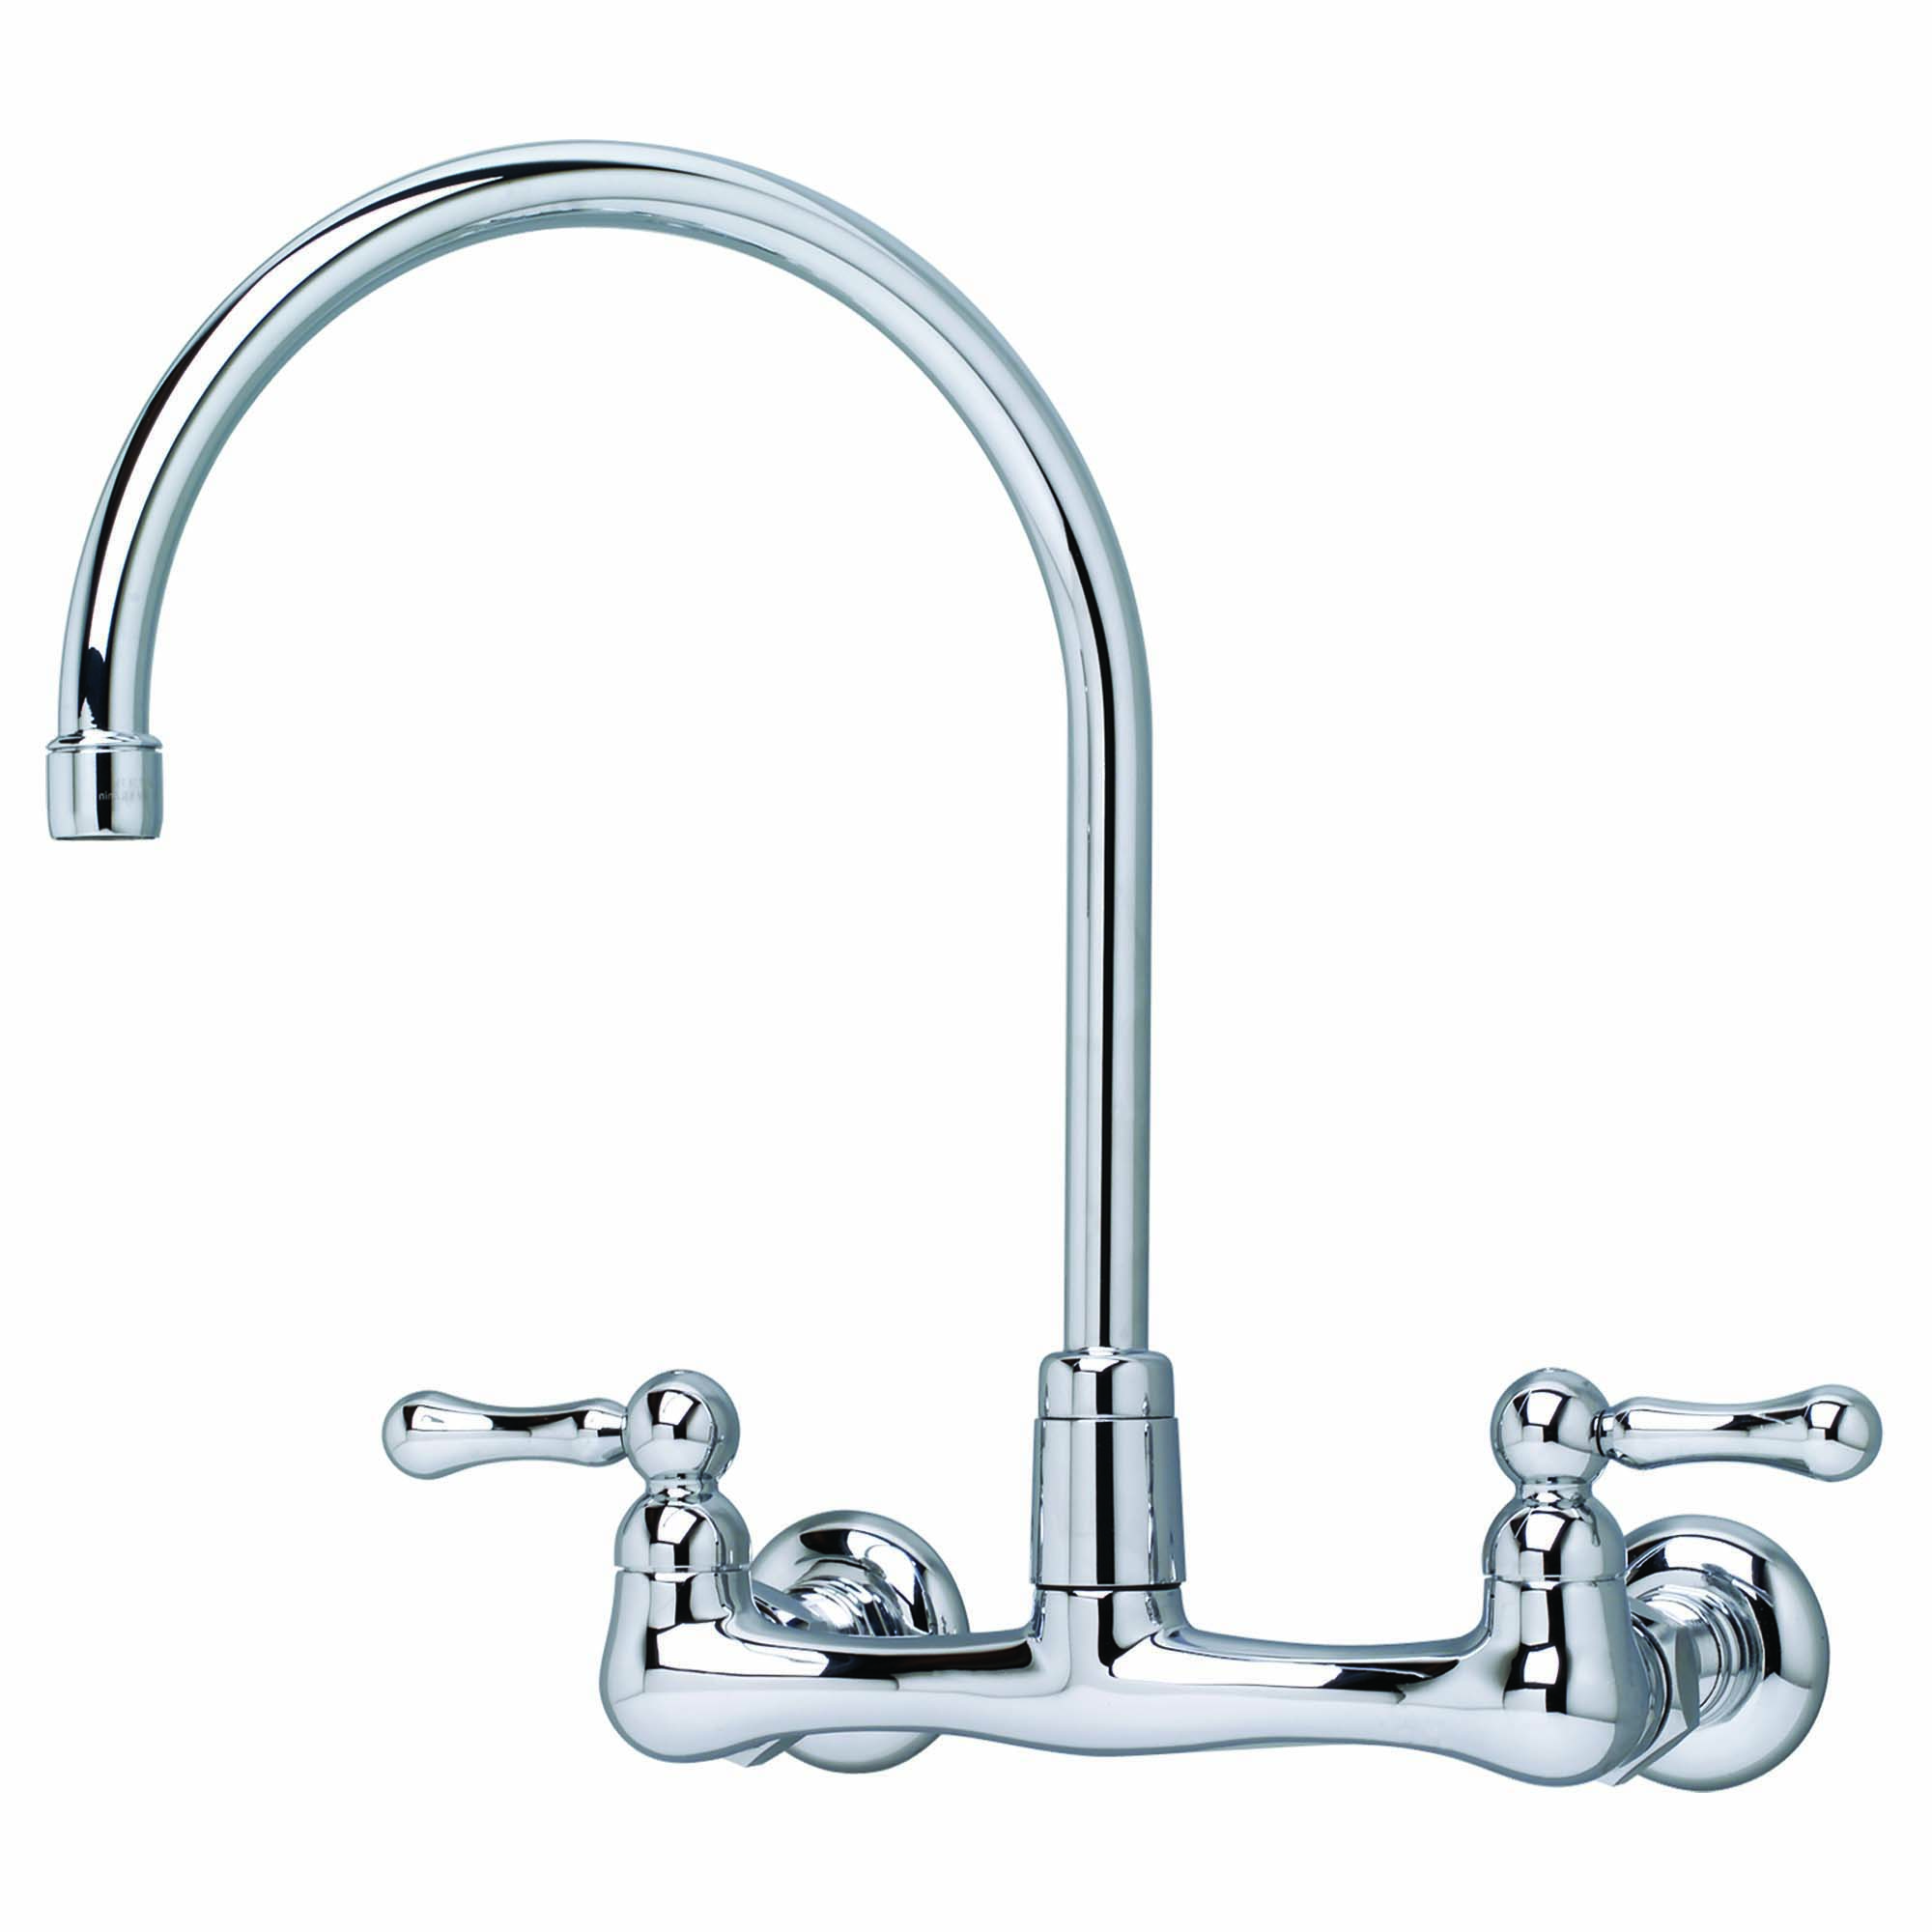 Heritage® Wall Mount Faucet With Gooseneck Spout and Lever Handles